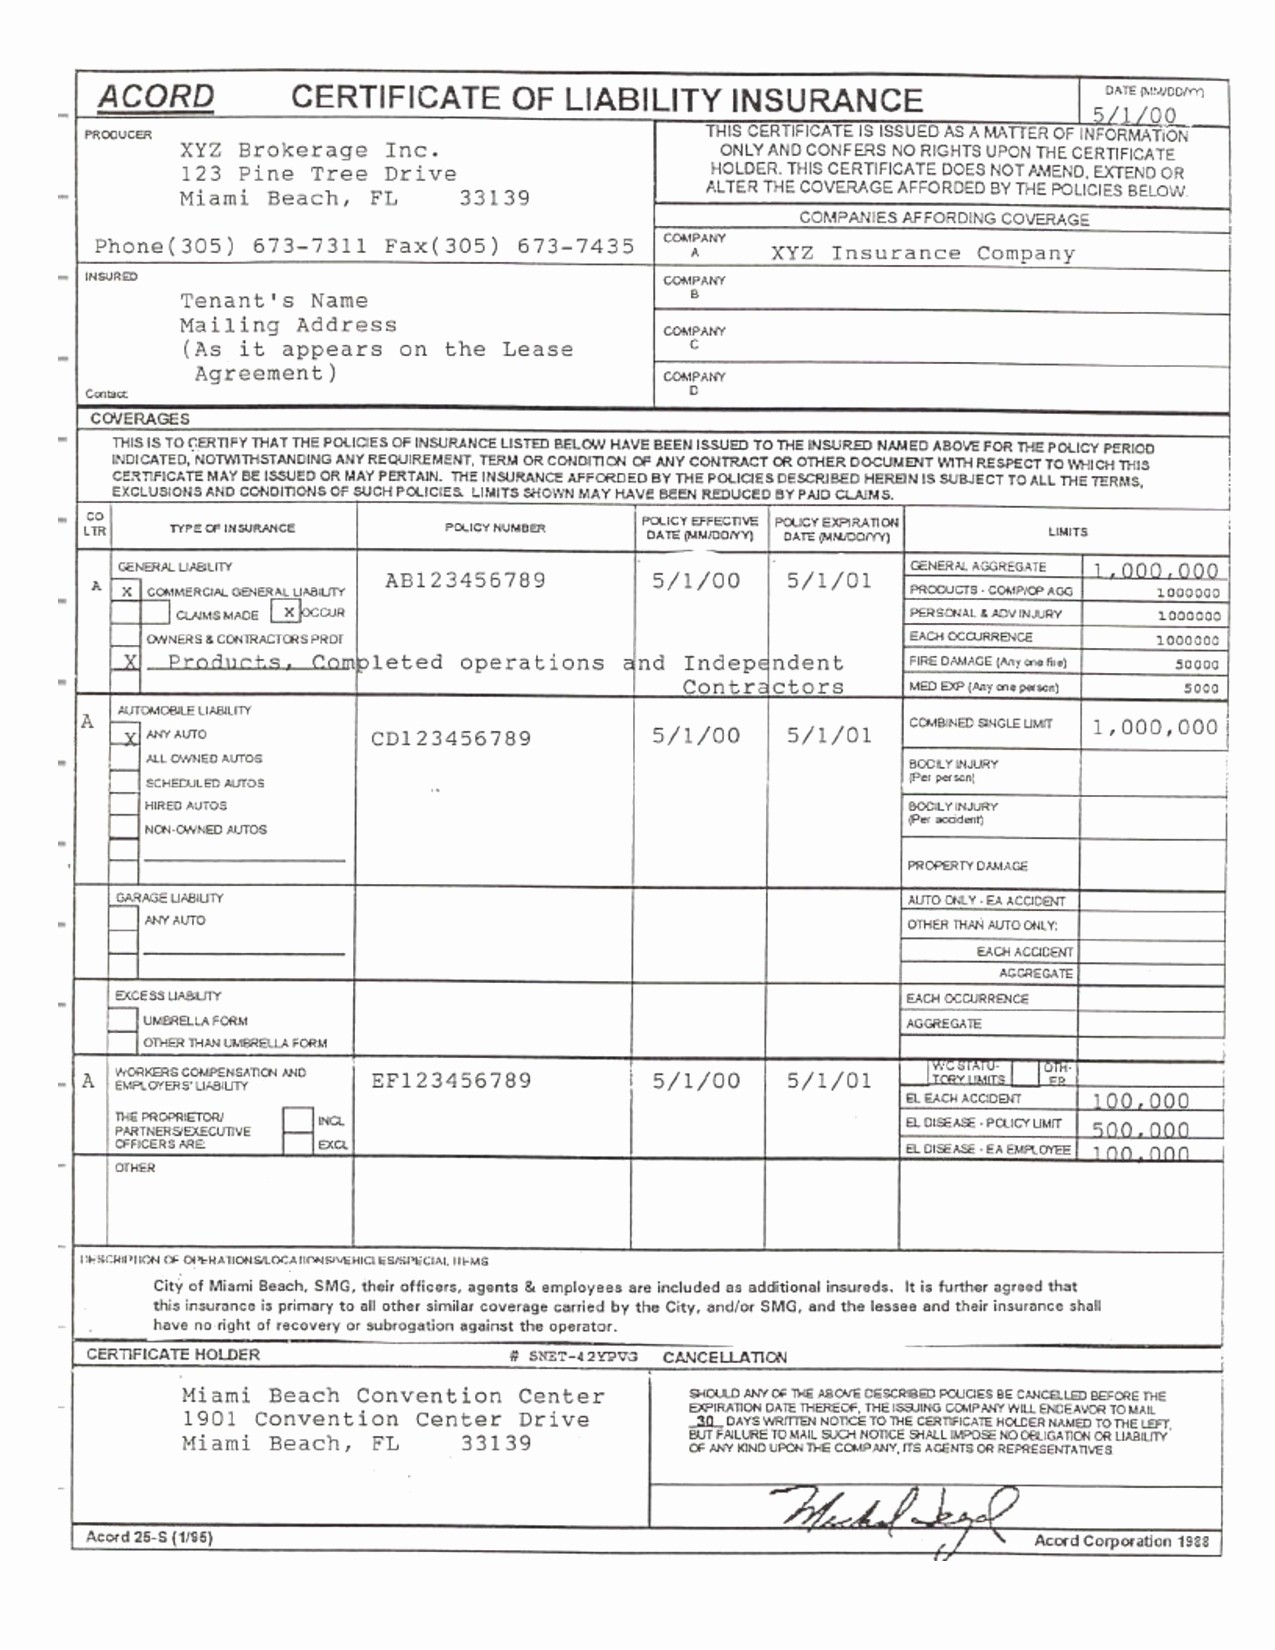 Insurance Declaration Page Usaa Usaa Homeowners Insurance Binder Request Review Home Co